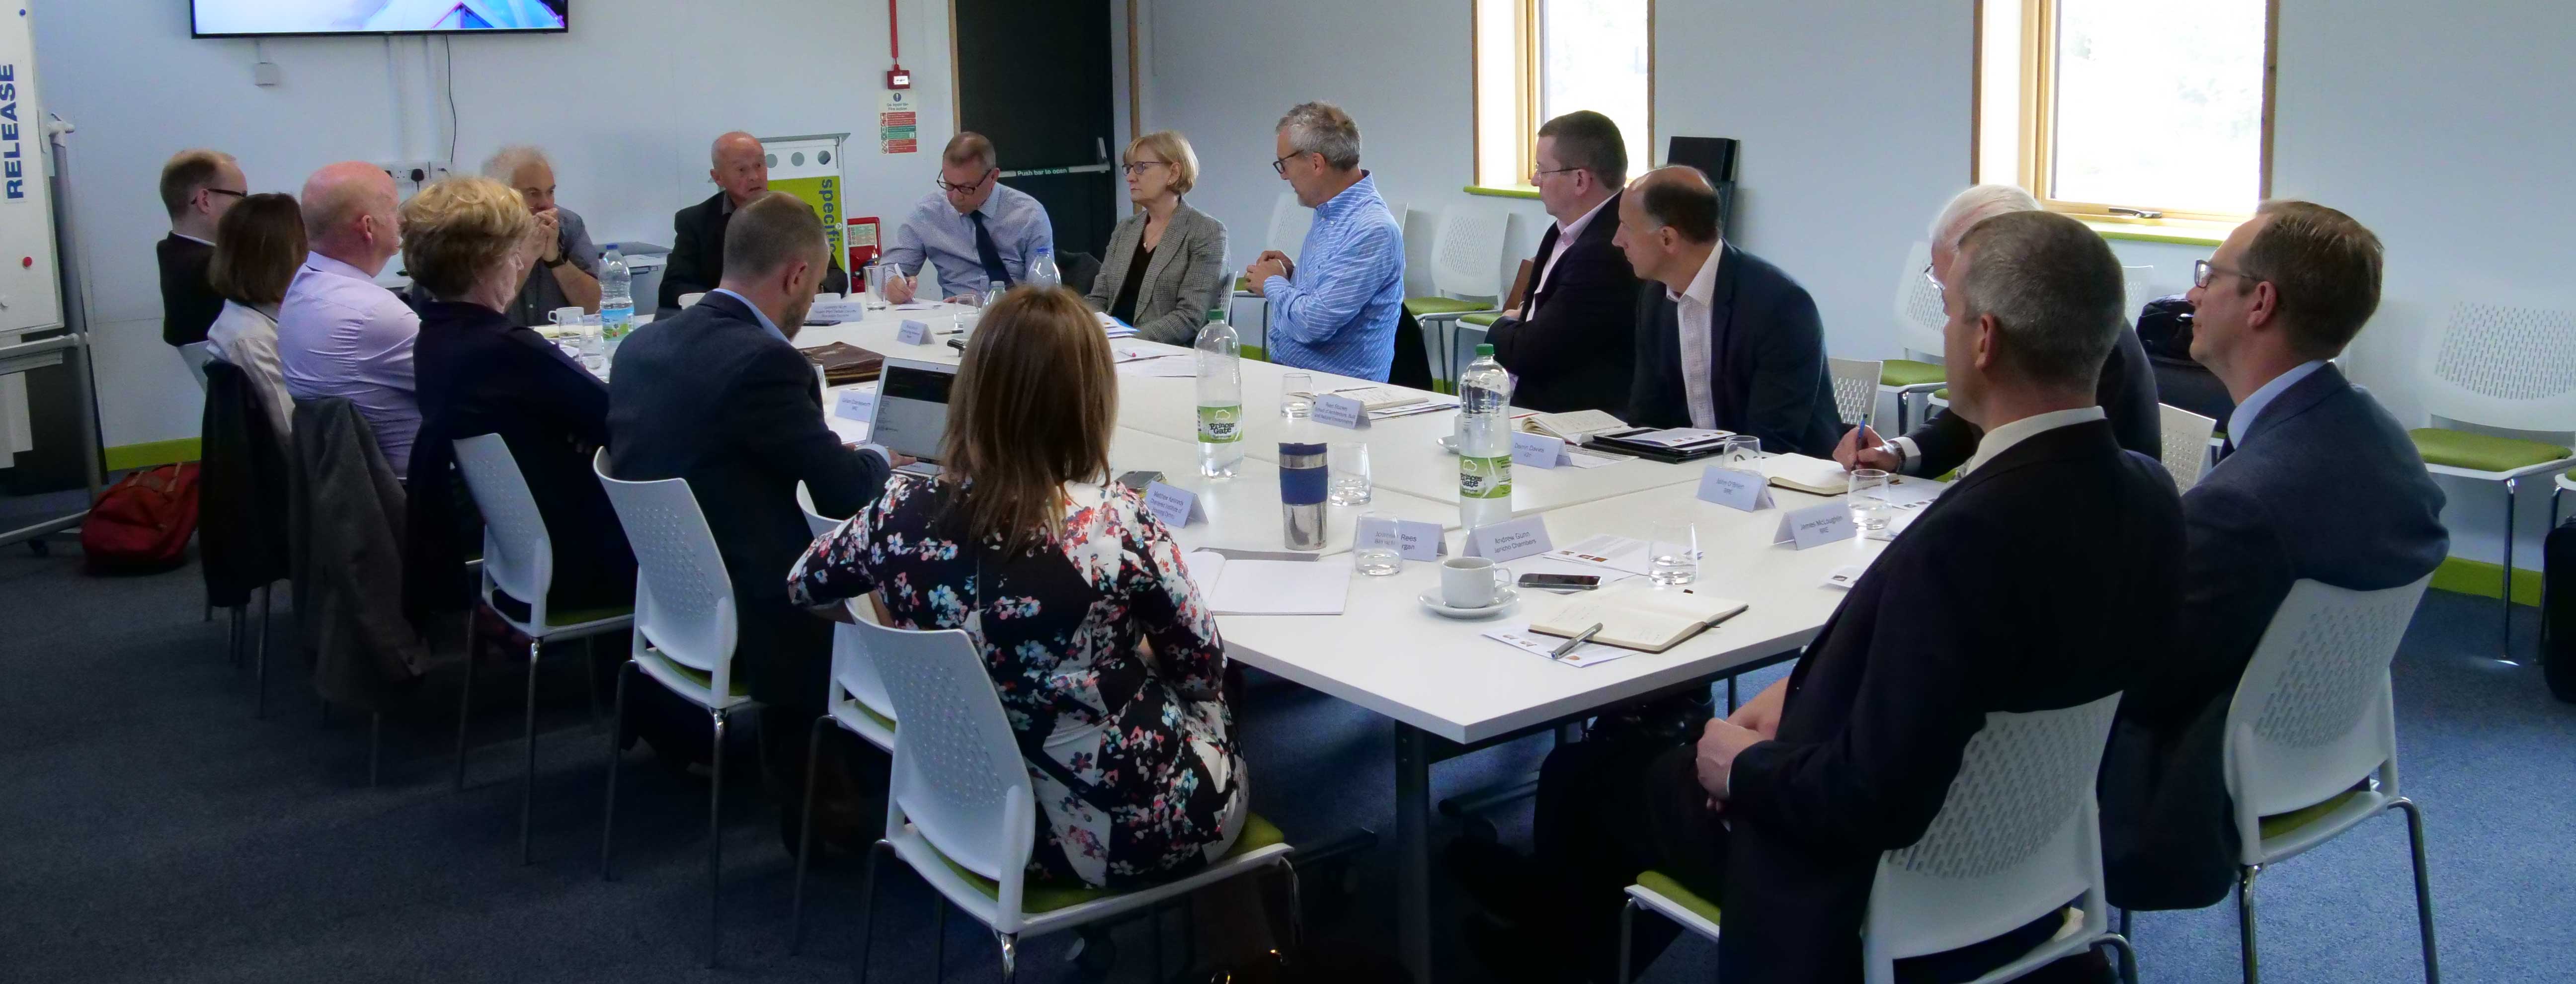 BRE's CEO leads built environment experts on a housing issues debate